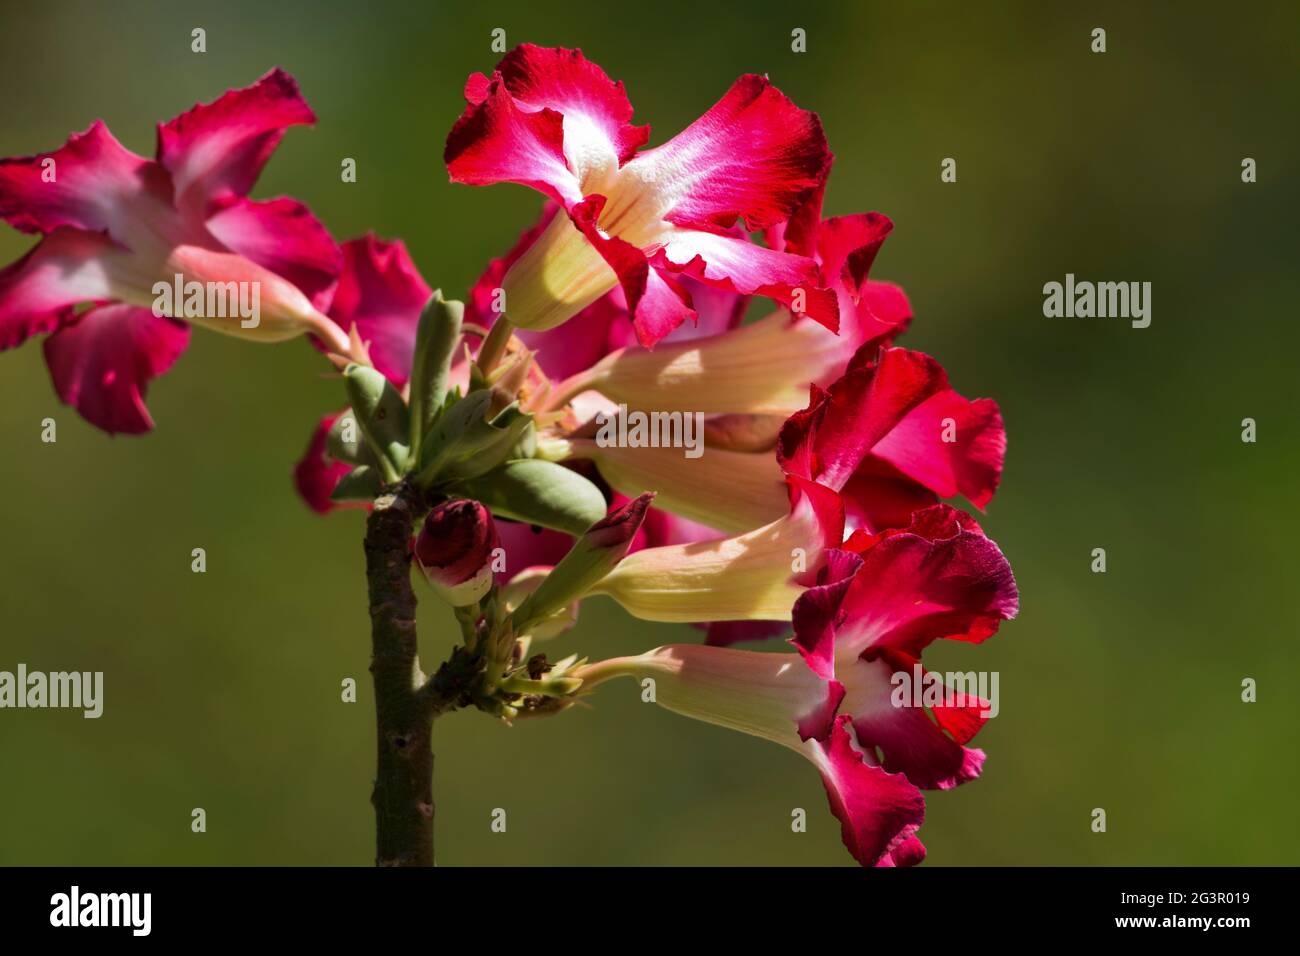 Beautiful Ornamental flowering bonsai plant Adenium also known as Desert rose or Japanese frangipani. Dark bright pink shaded with white trumbet tue s Stock Photo